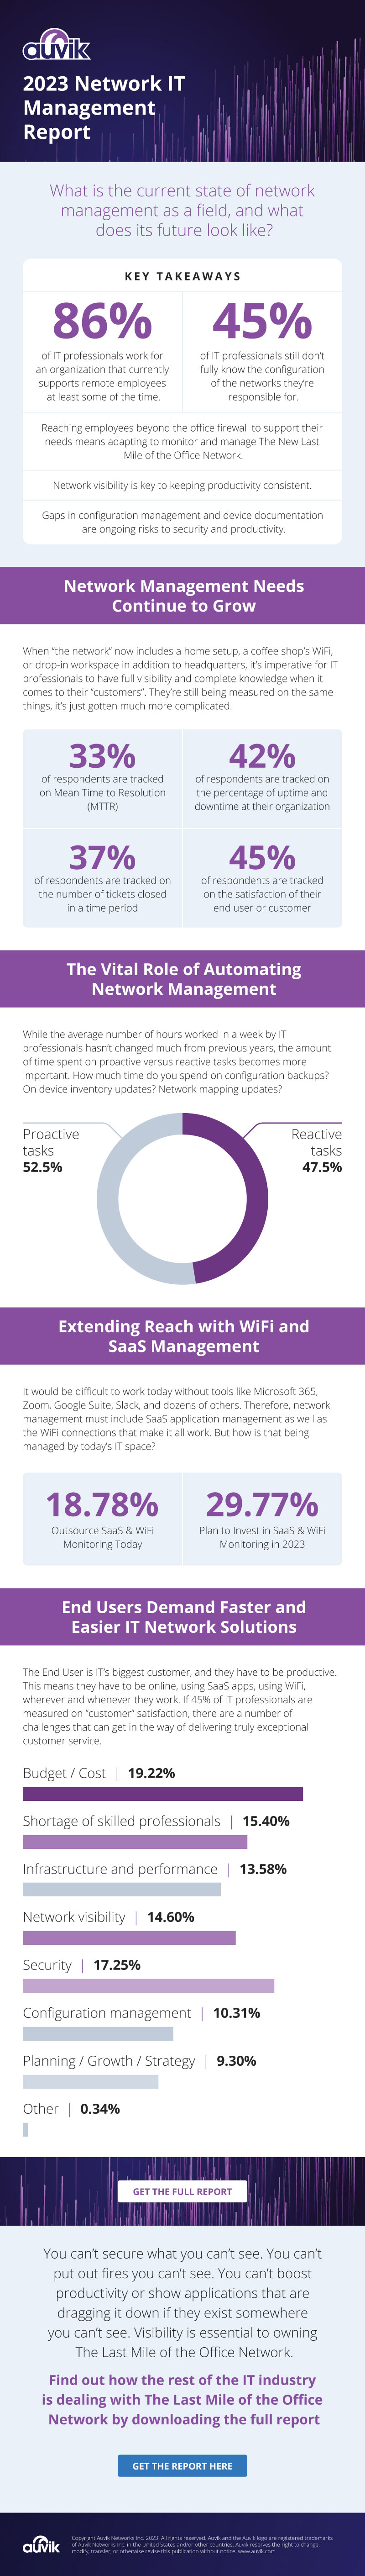 infographic - 2023 Network IT Management Report